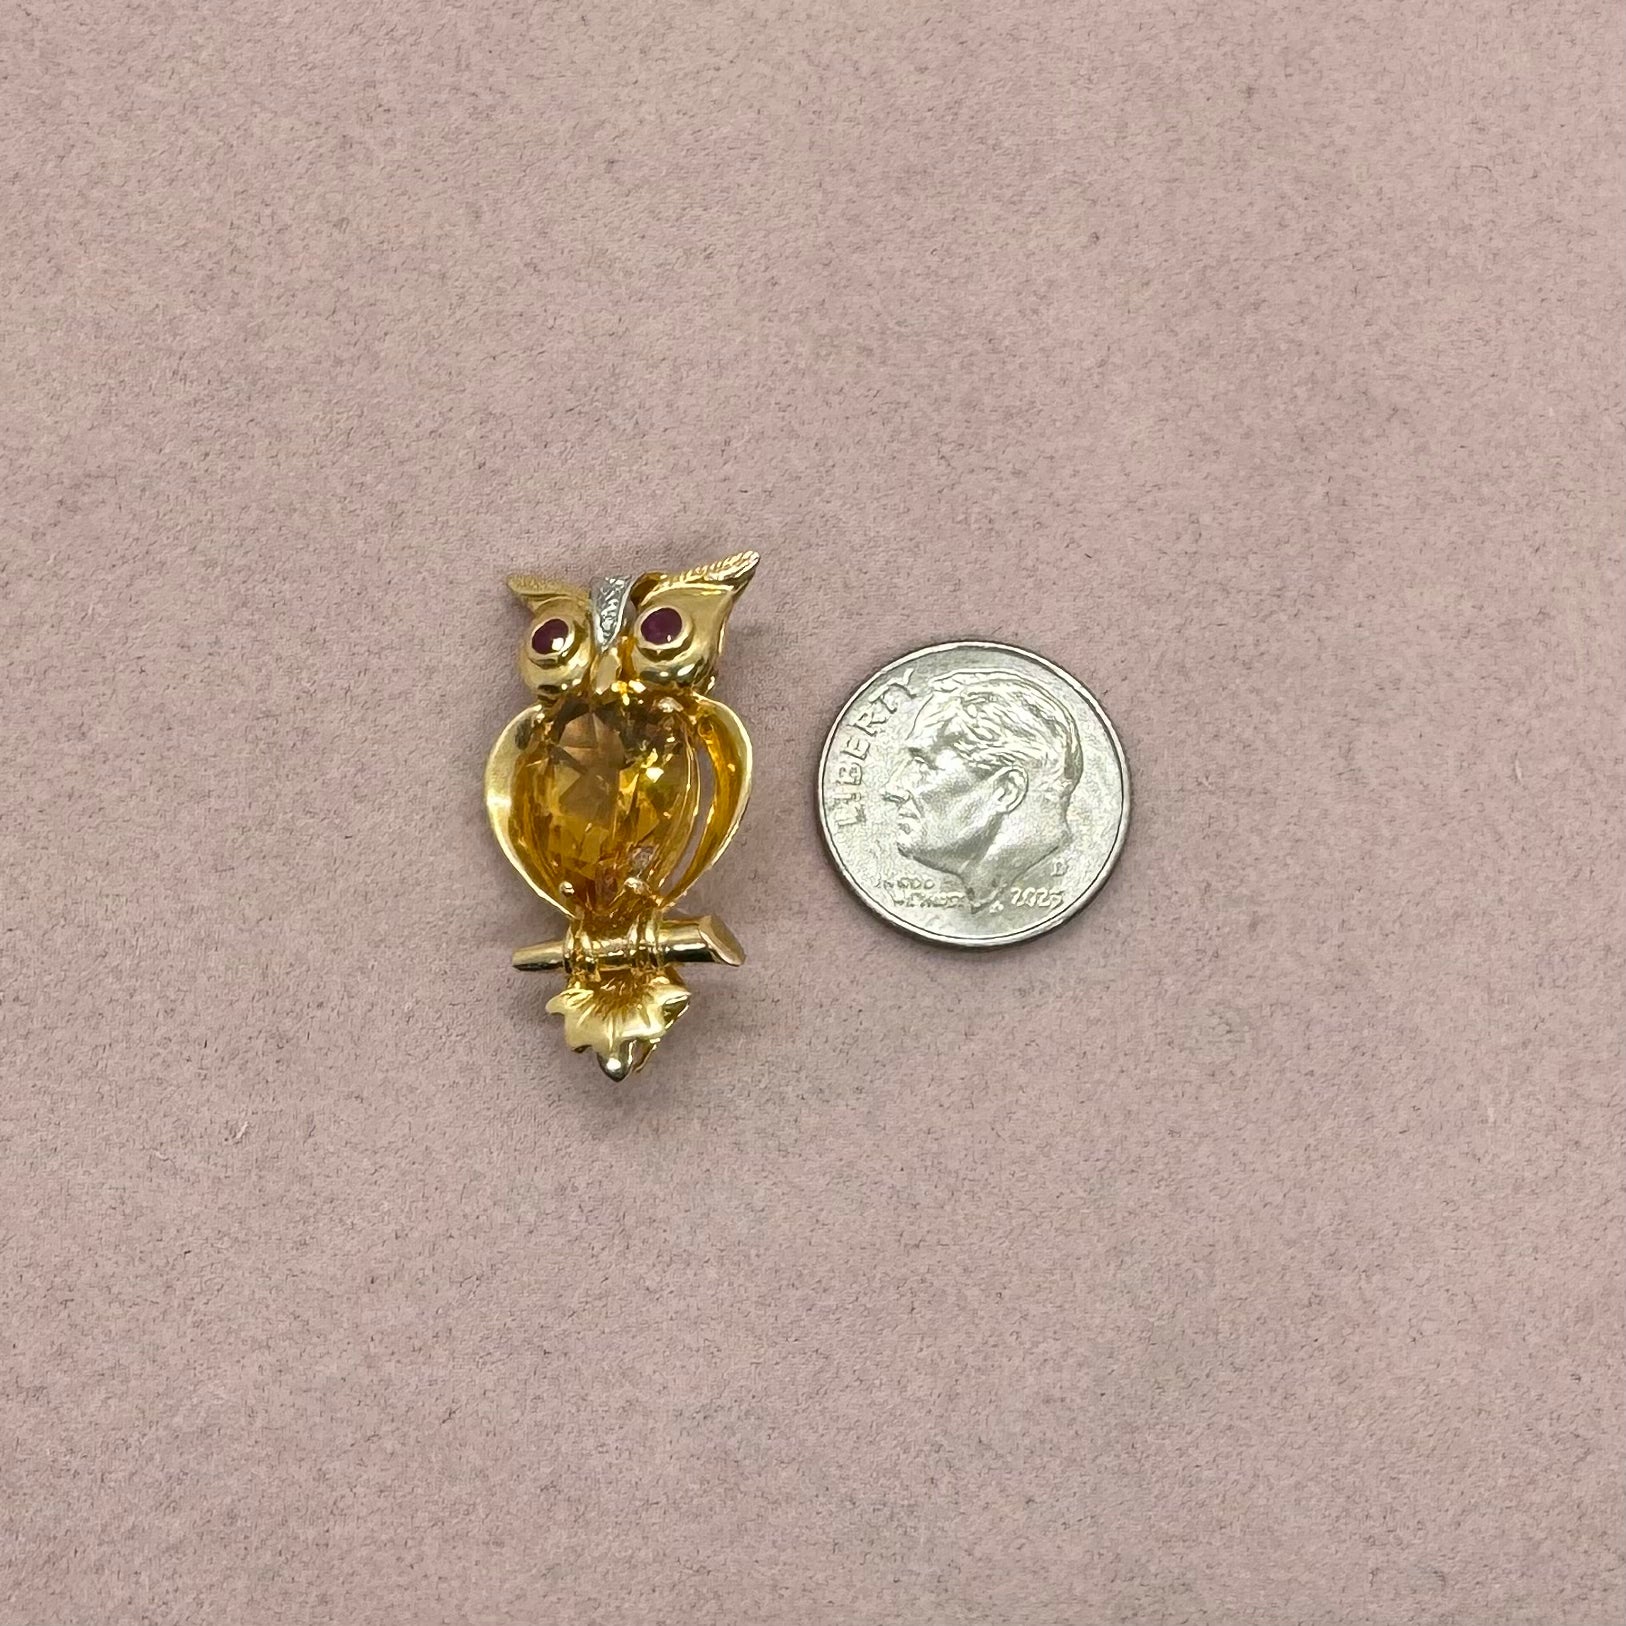 Large Citrine Owl Pendant and Pin